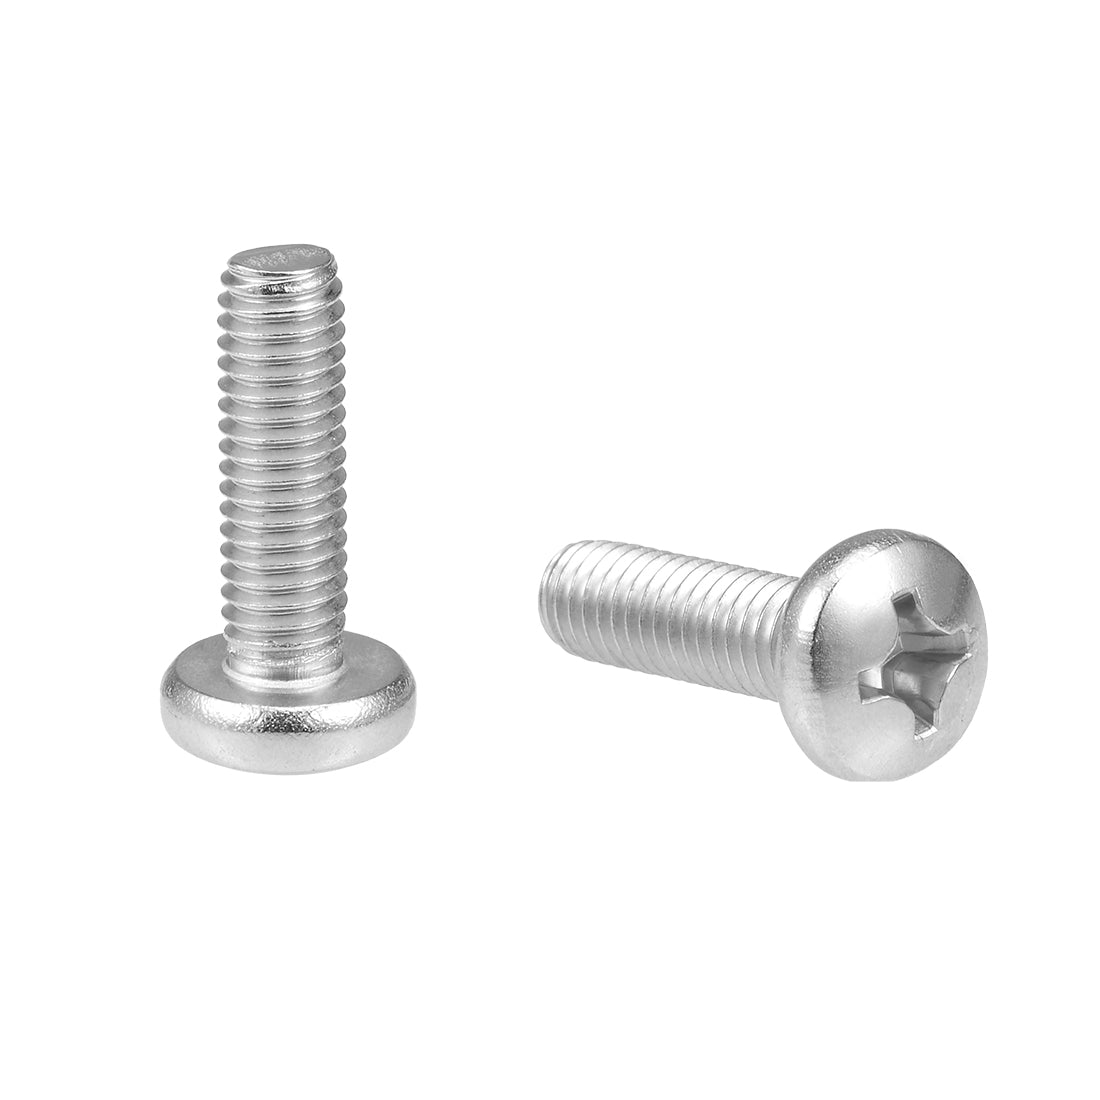 Uxcell Uxcell M6x35mm Machine Screws Pan Phillips Cross Head Screw 304 Stainless Steel Fasteners Bolts 15Pcs